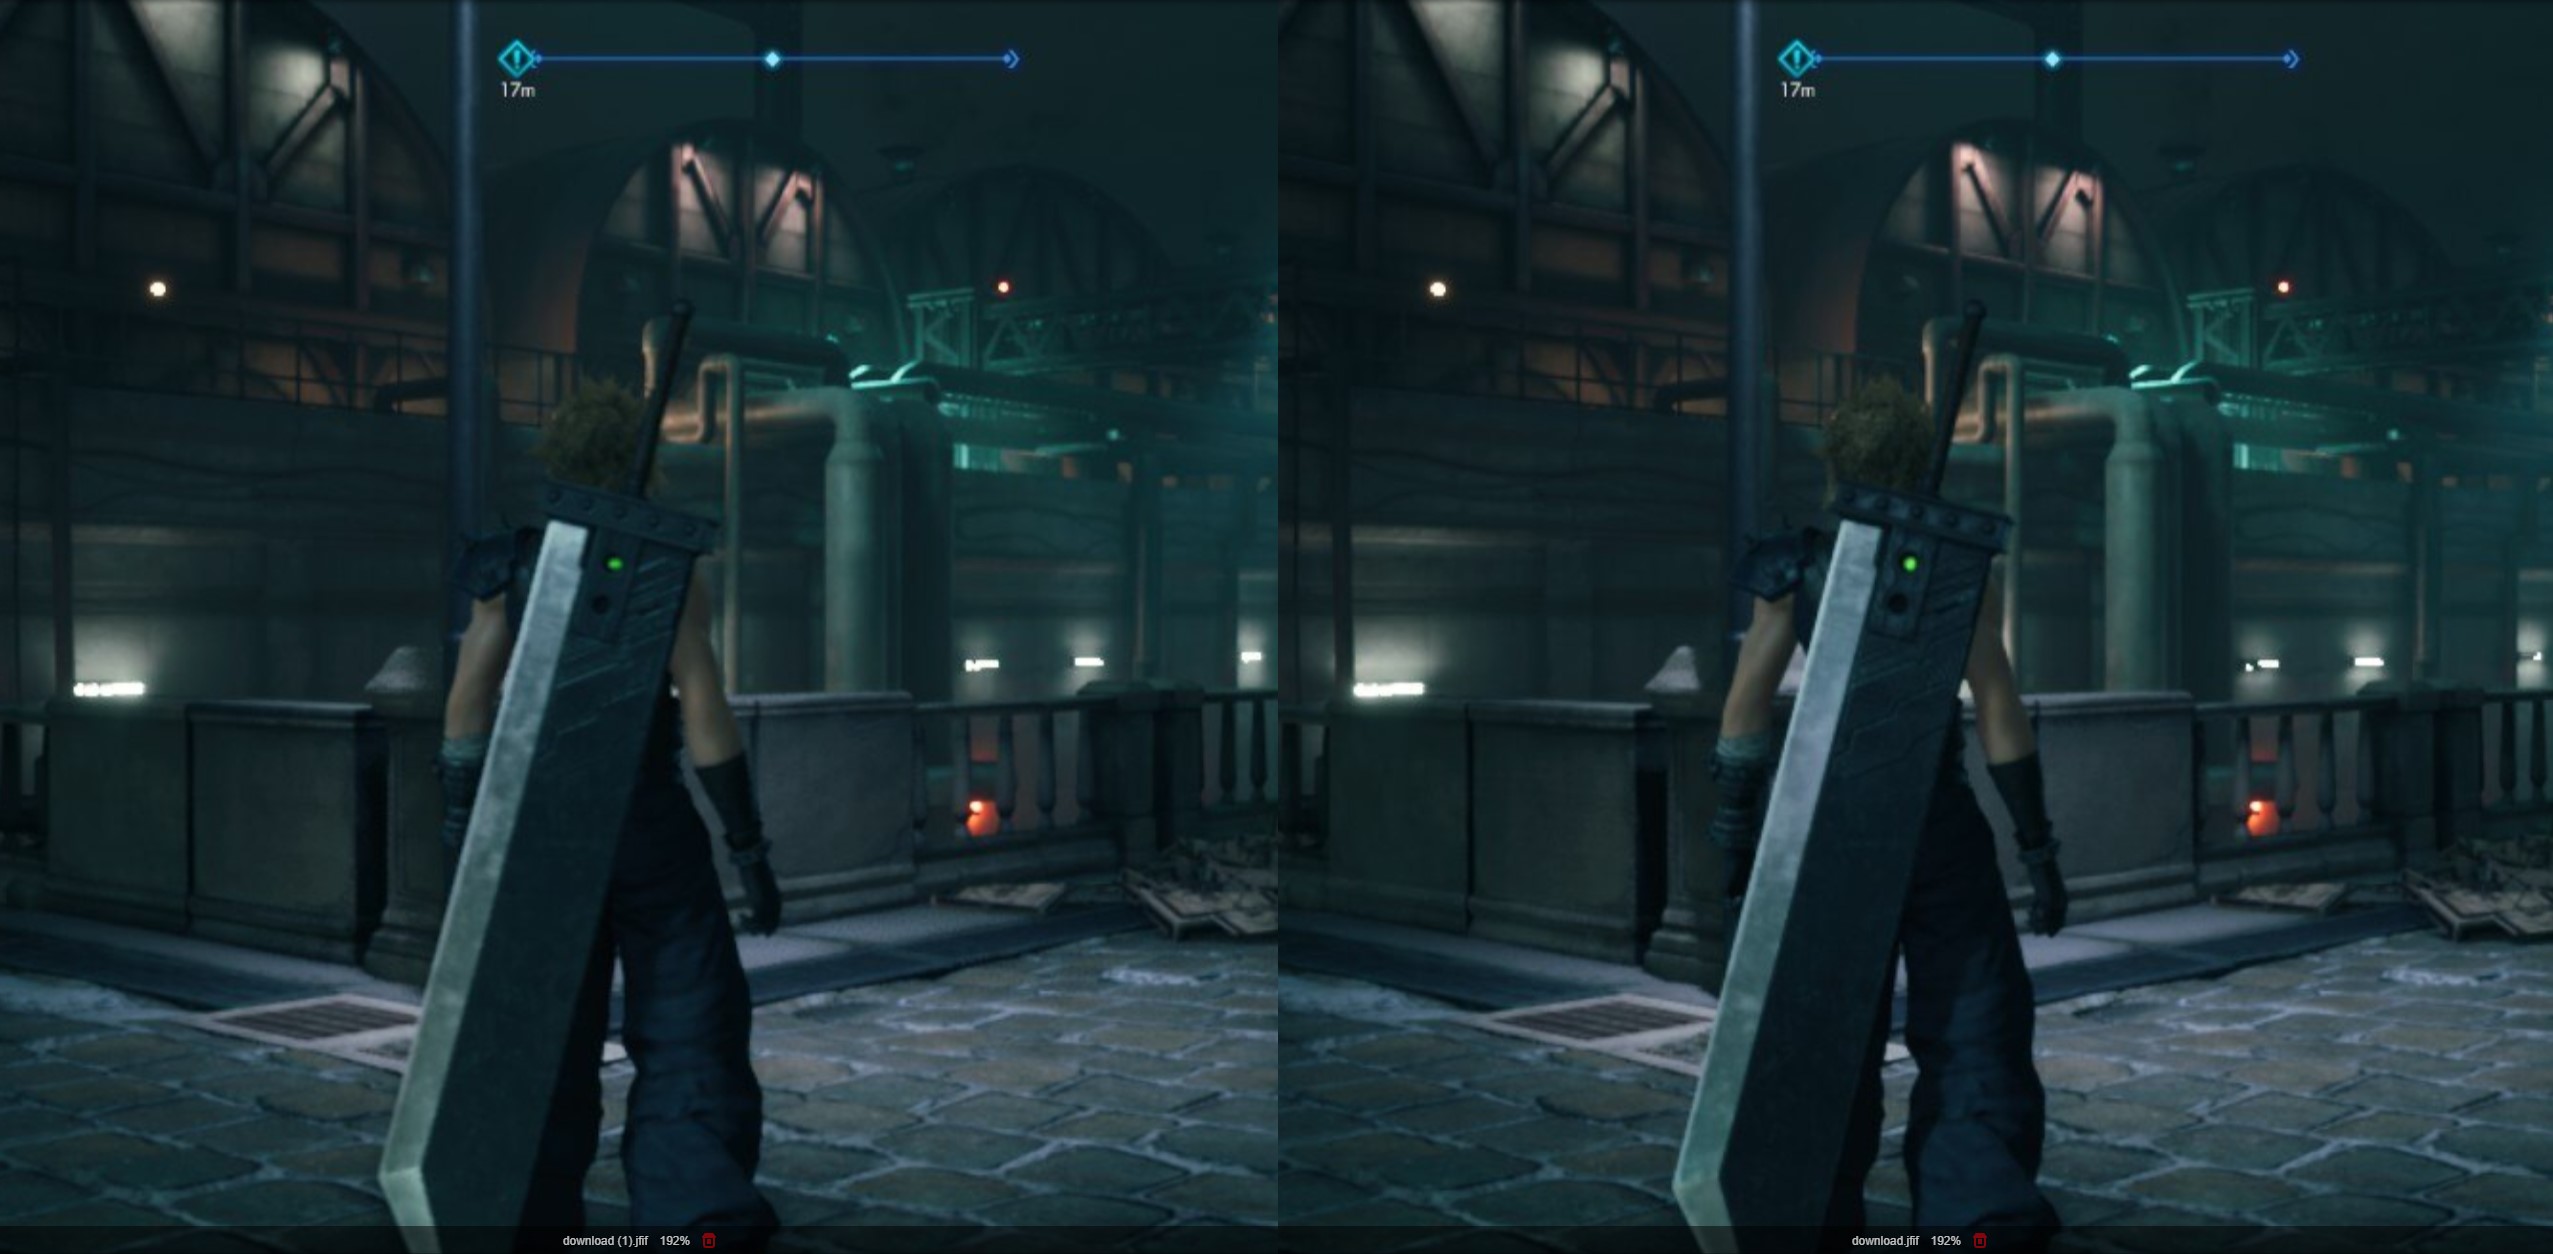 So how does FINAL FANTASY VII REMAKE actually play?